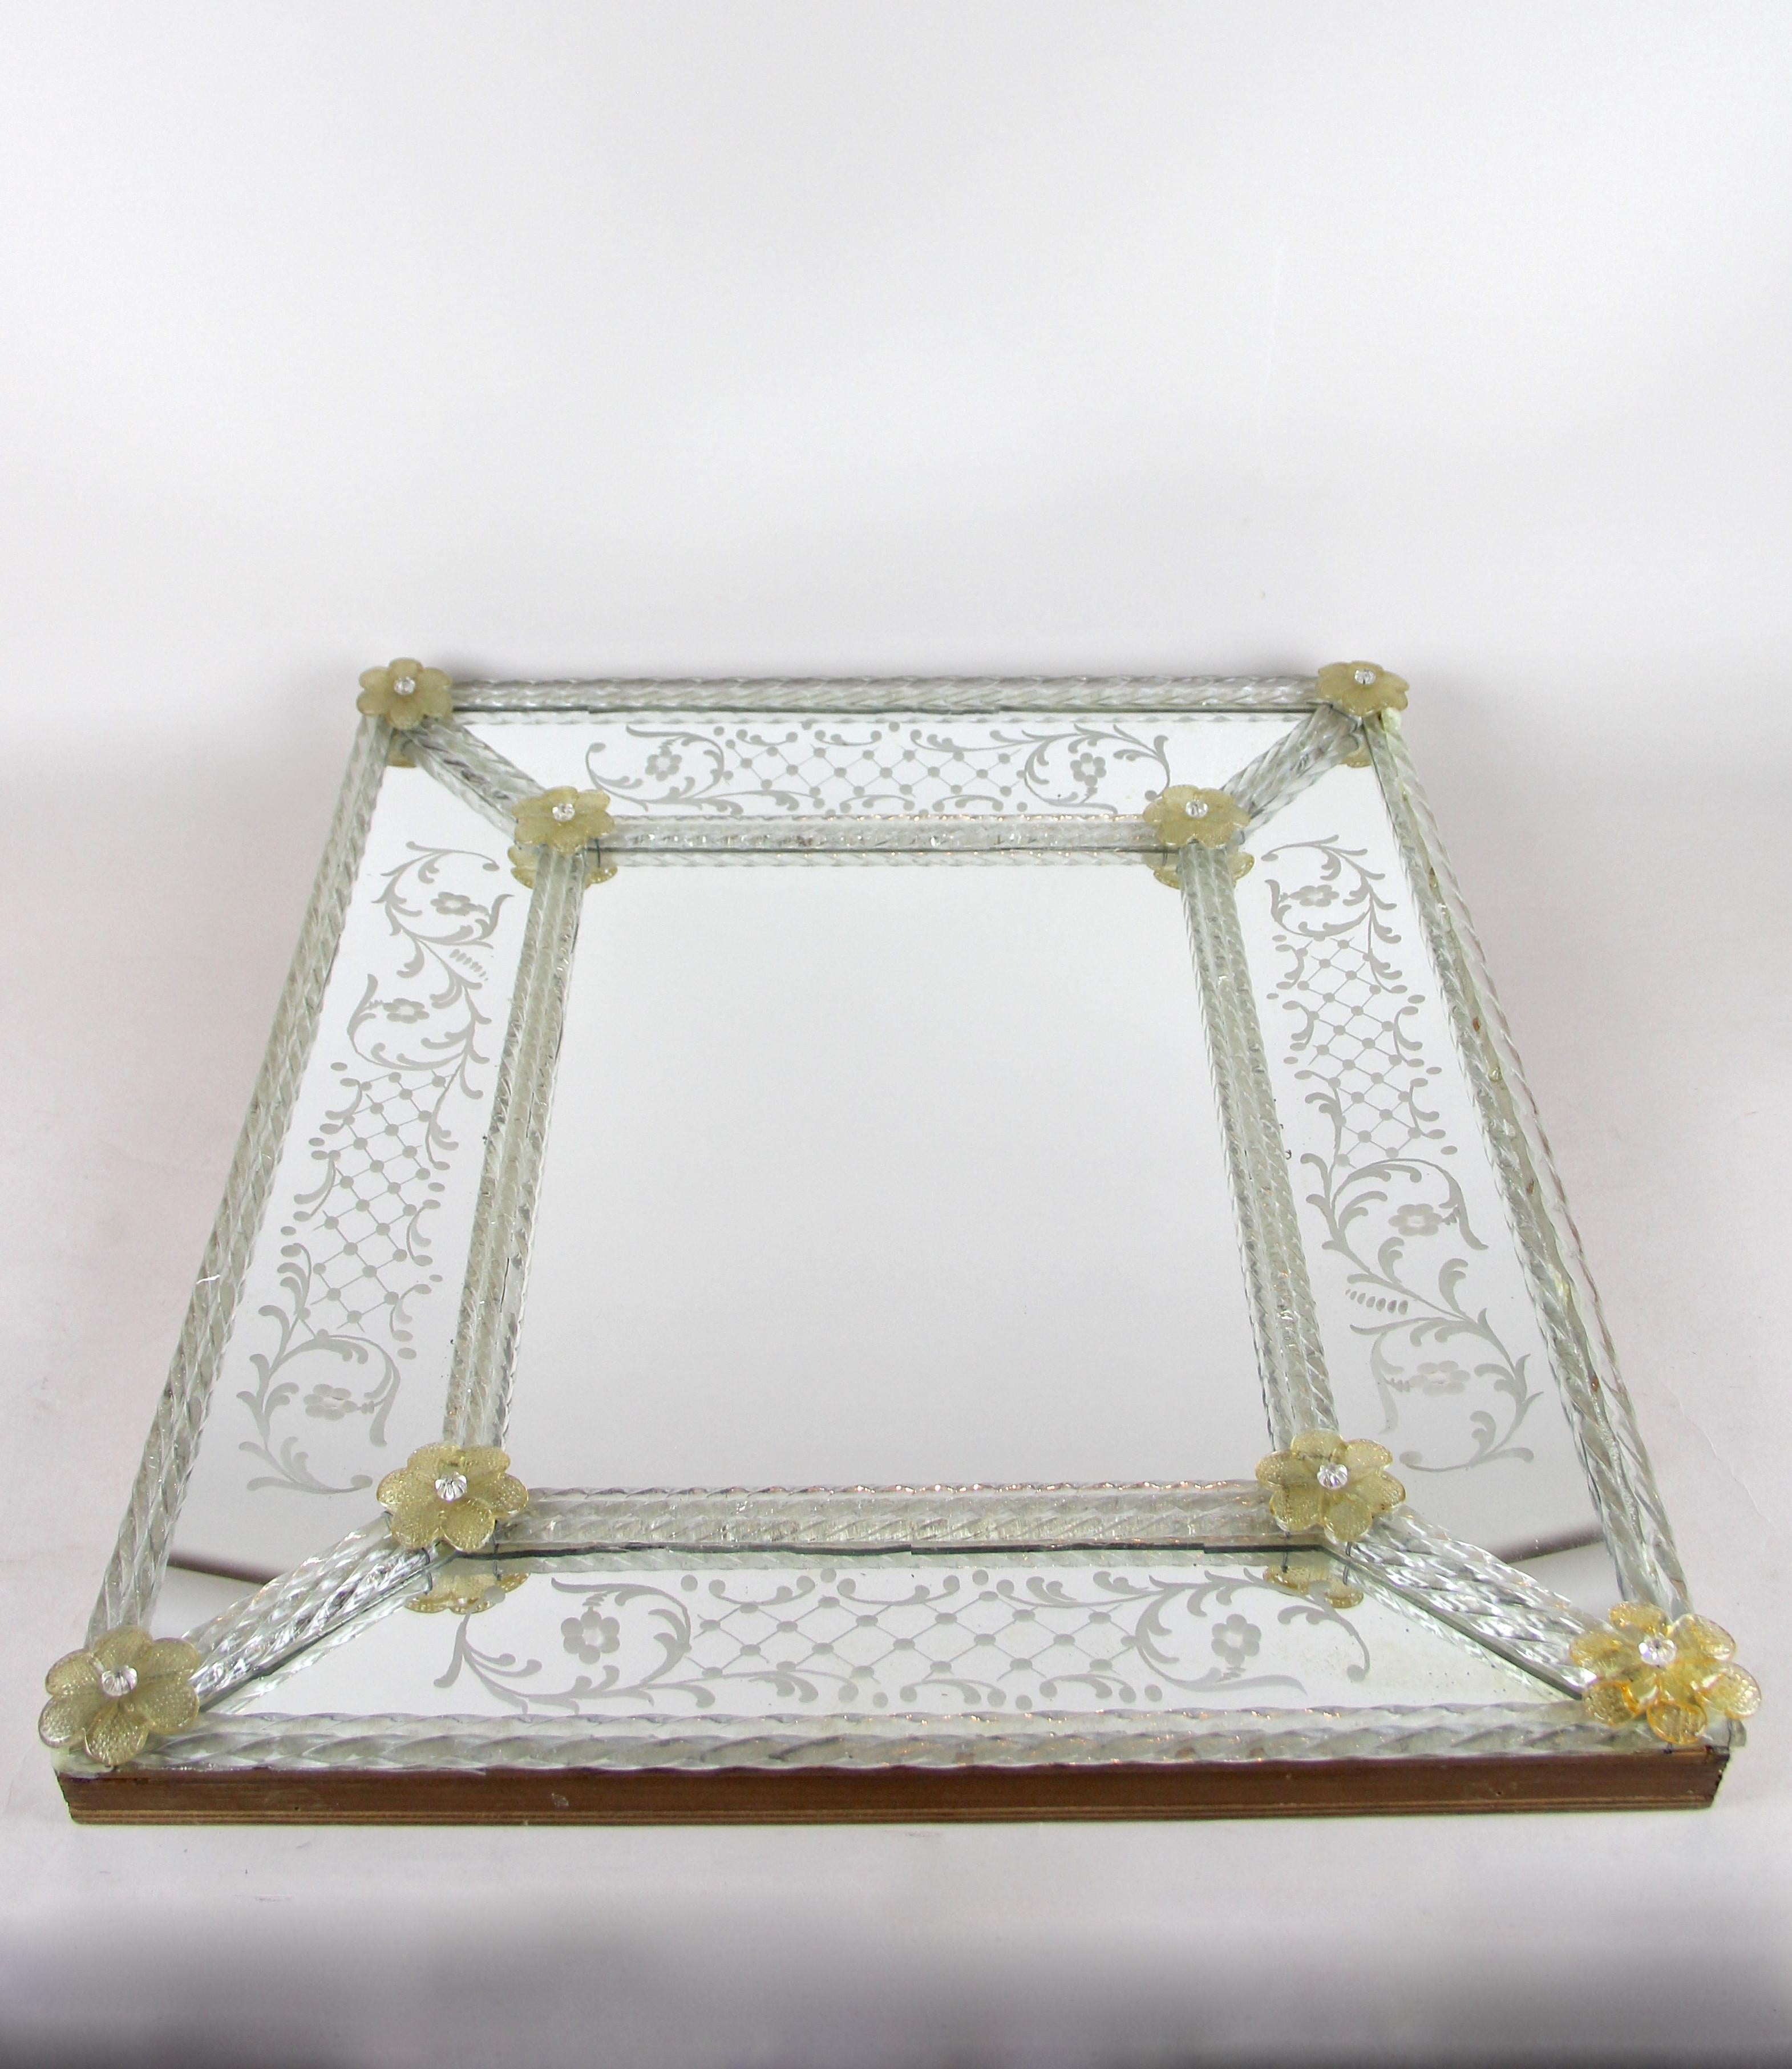 Breathtaking midcentury Murano glass mirror out of the famous workshops in Italy from circa 1950. The rectangular mirror in the middle is surrounded by four slightly inclined Murano mirror glass elements showing artfully engraved designs. Each field